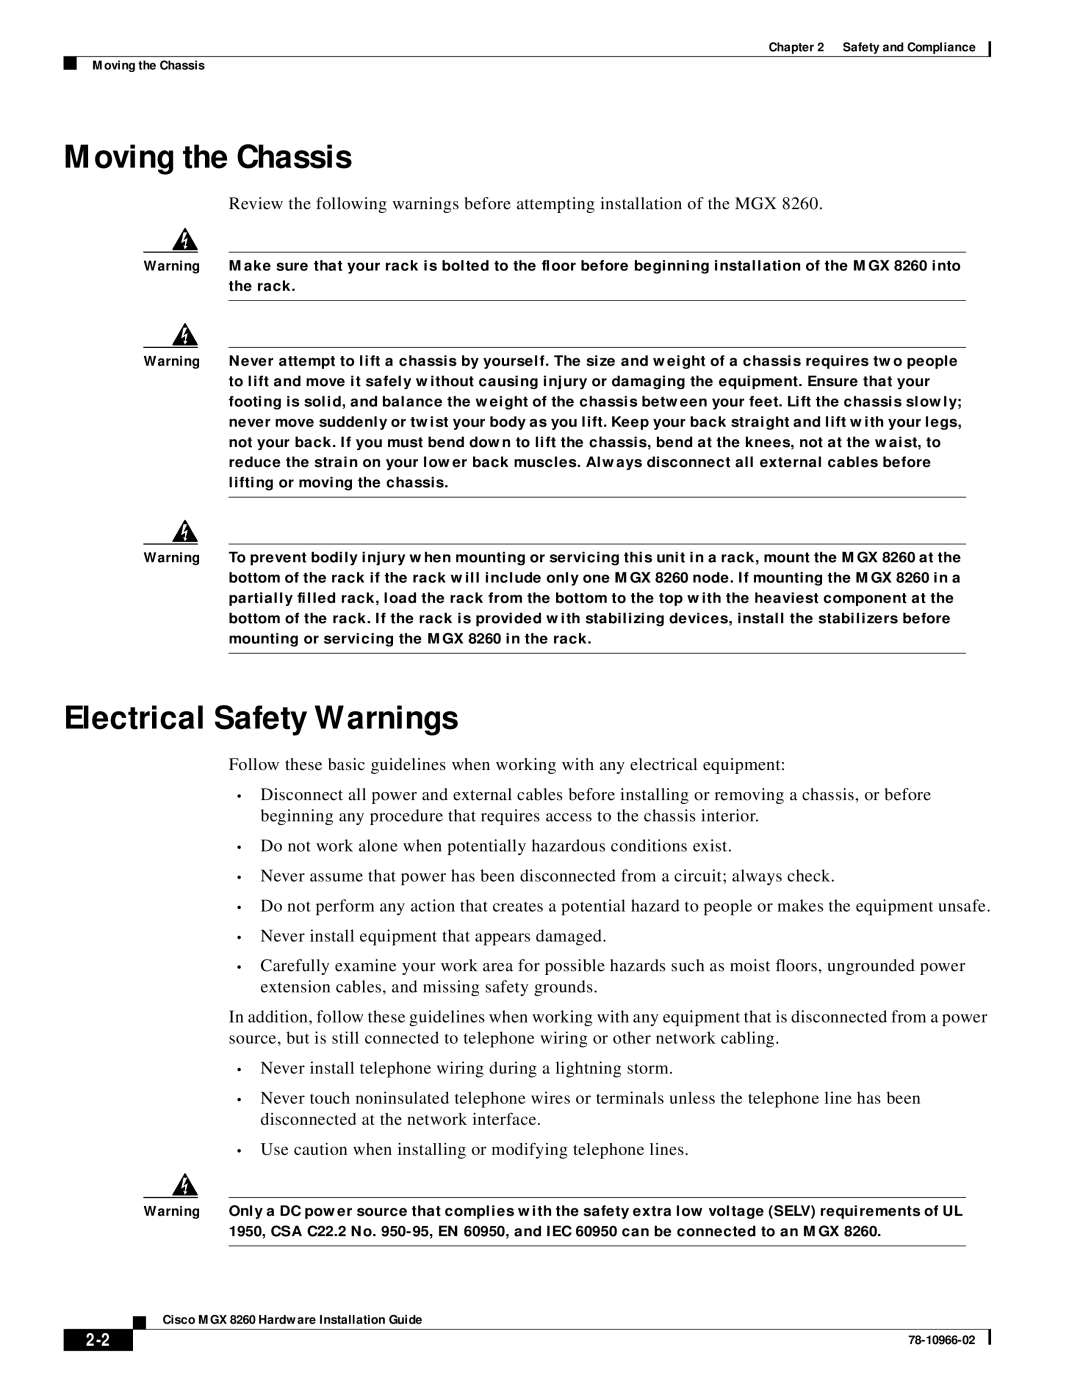 Cisco Systems MGX 8260 appendix Moving the Chassis, Electrical Safety Warnings 